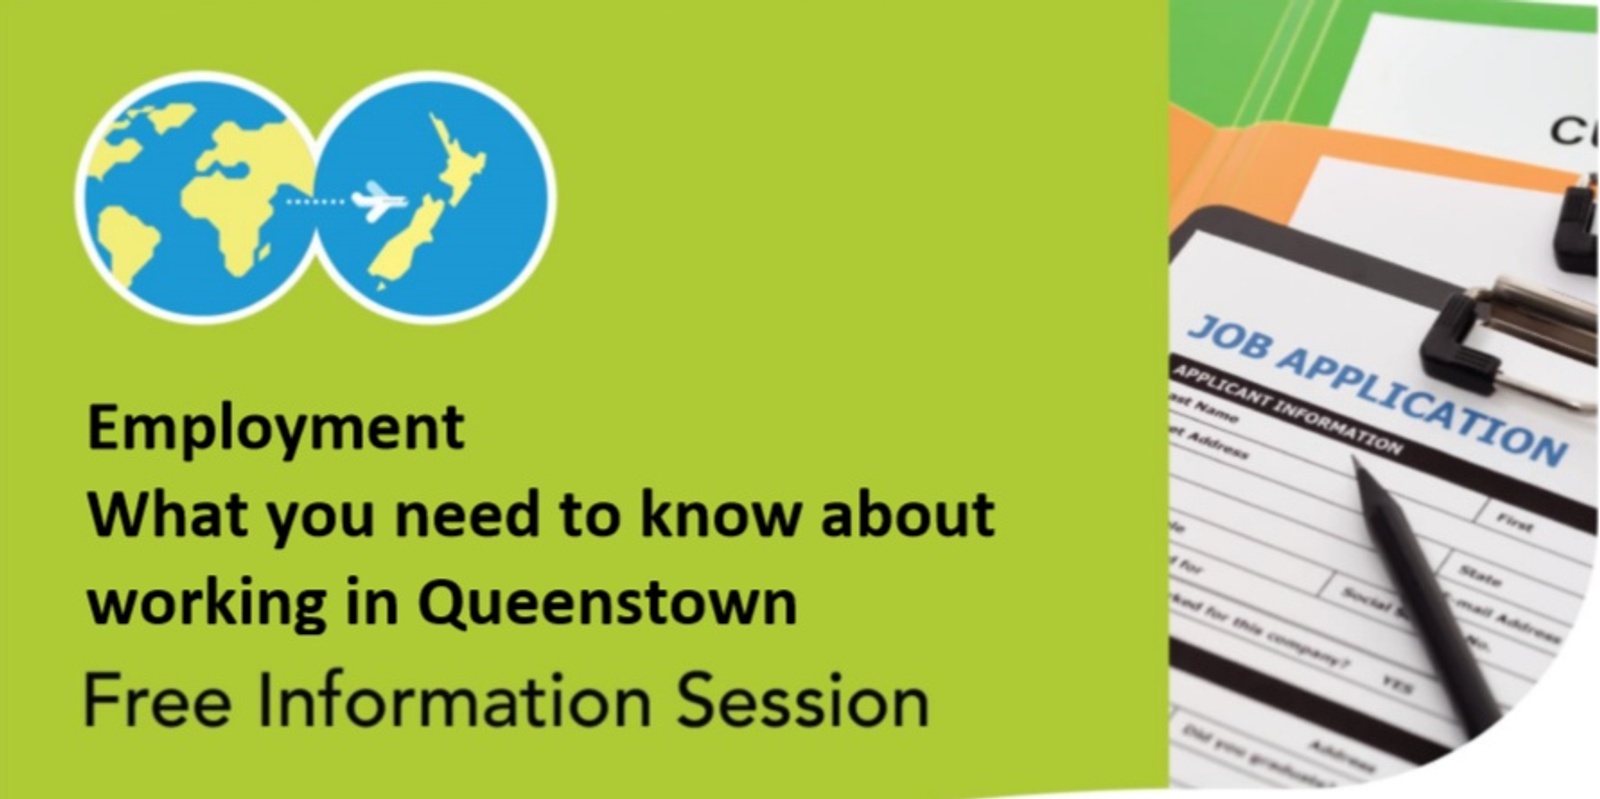 Banner image for Employment - What you need to know about working in Queenstown